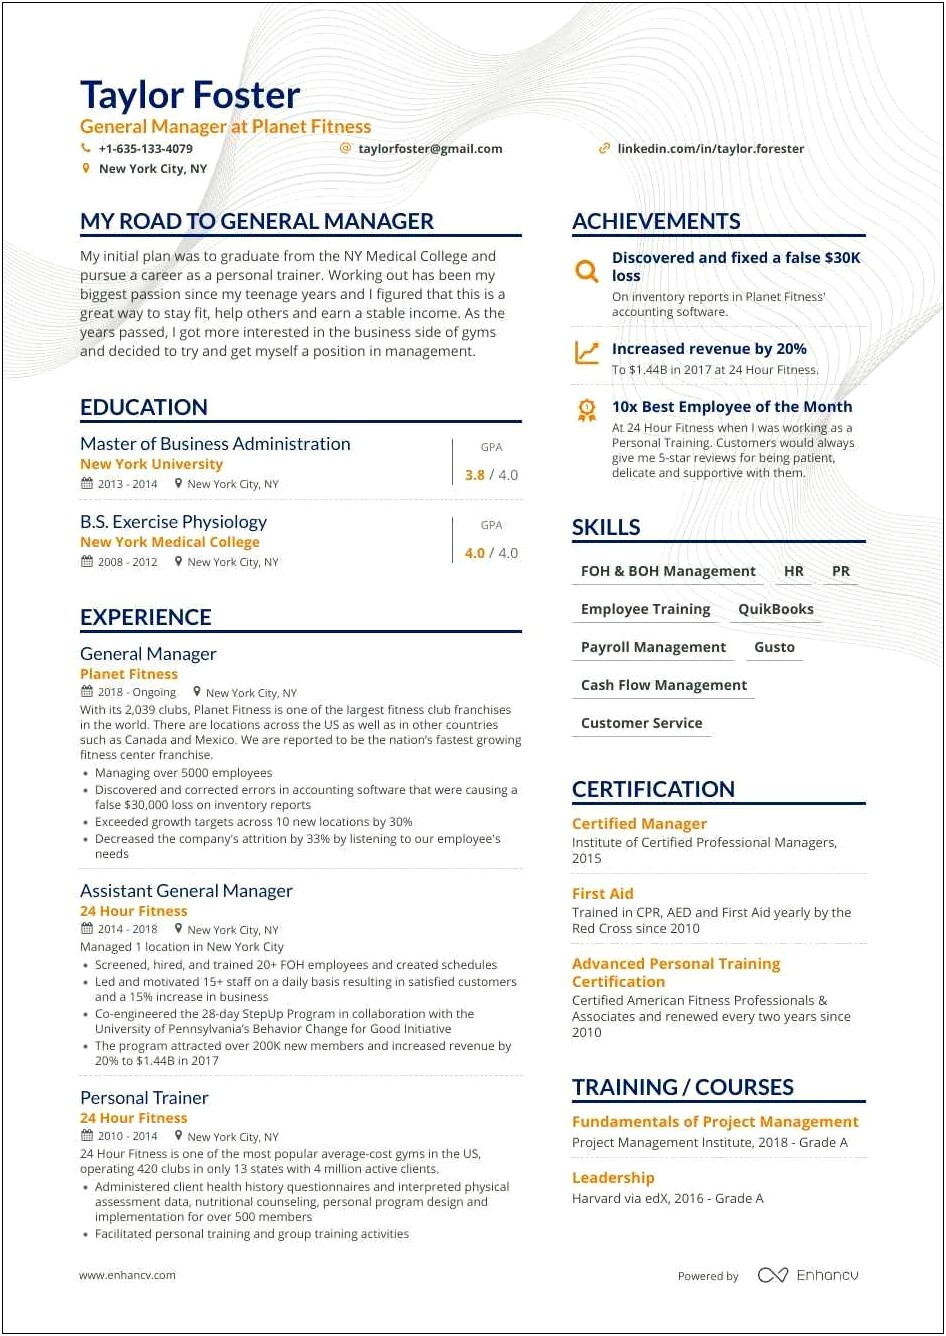 Bette Way To Say In Resume Manages